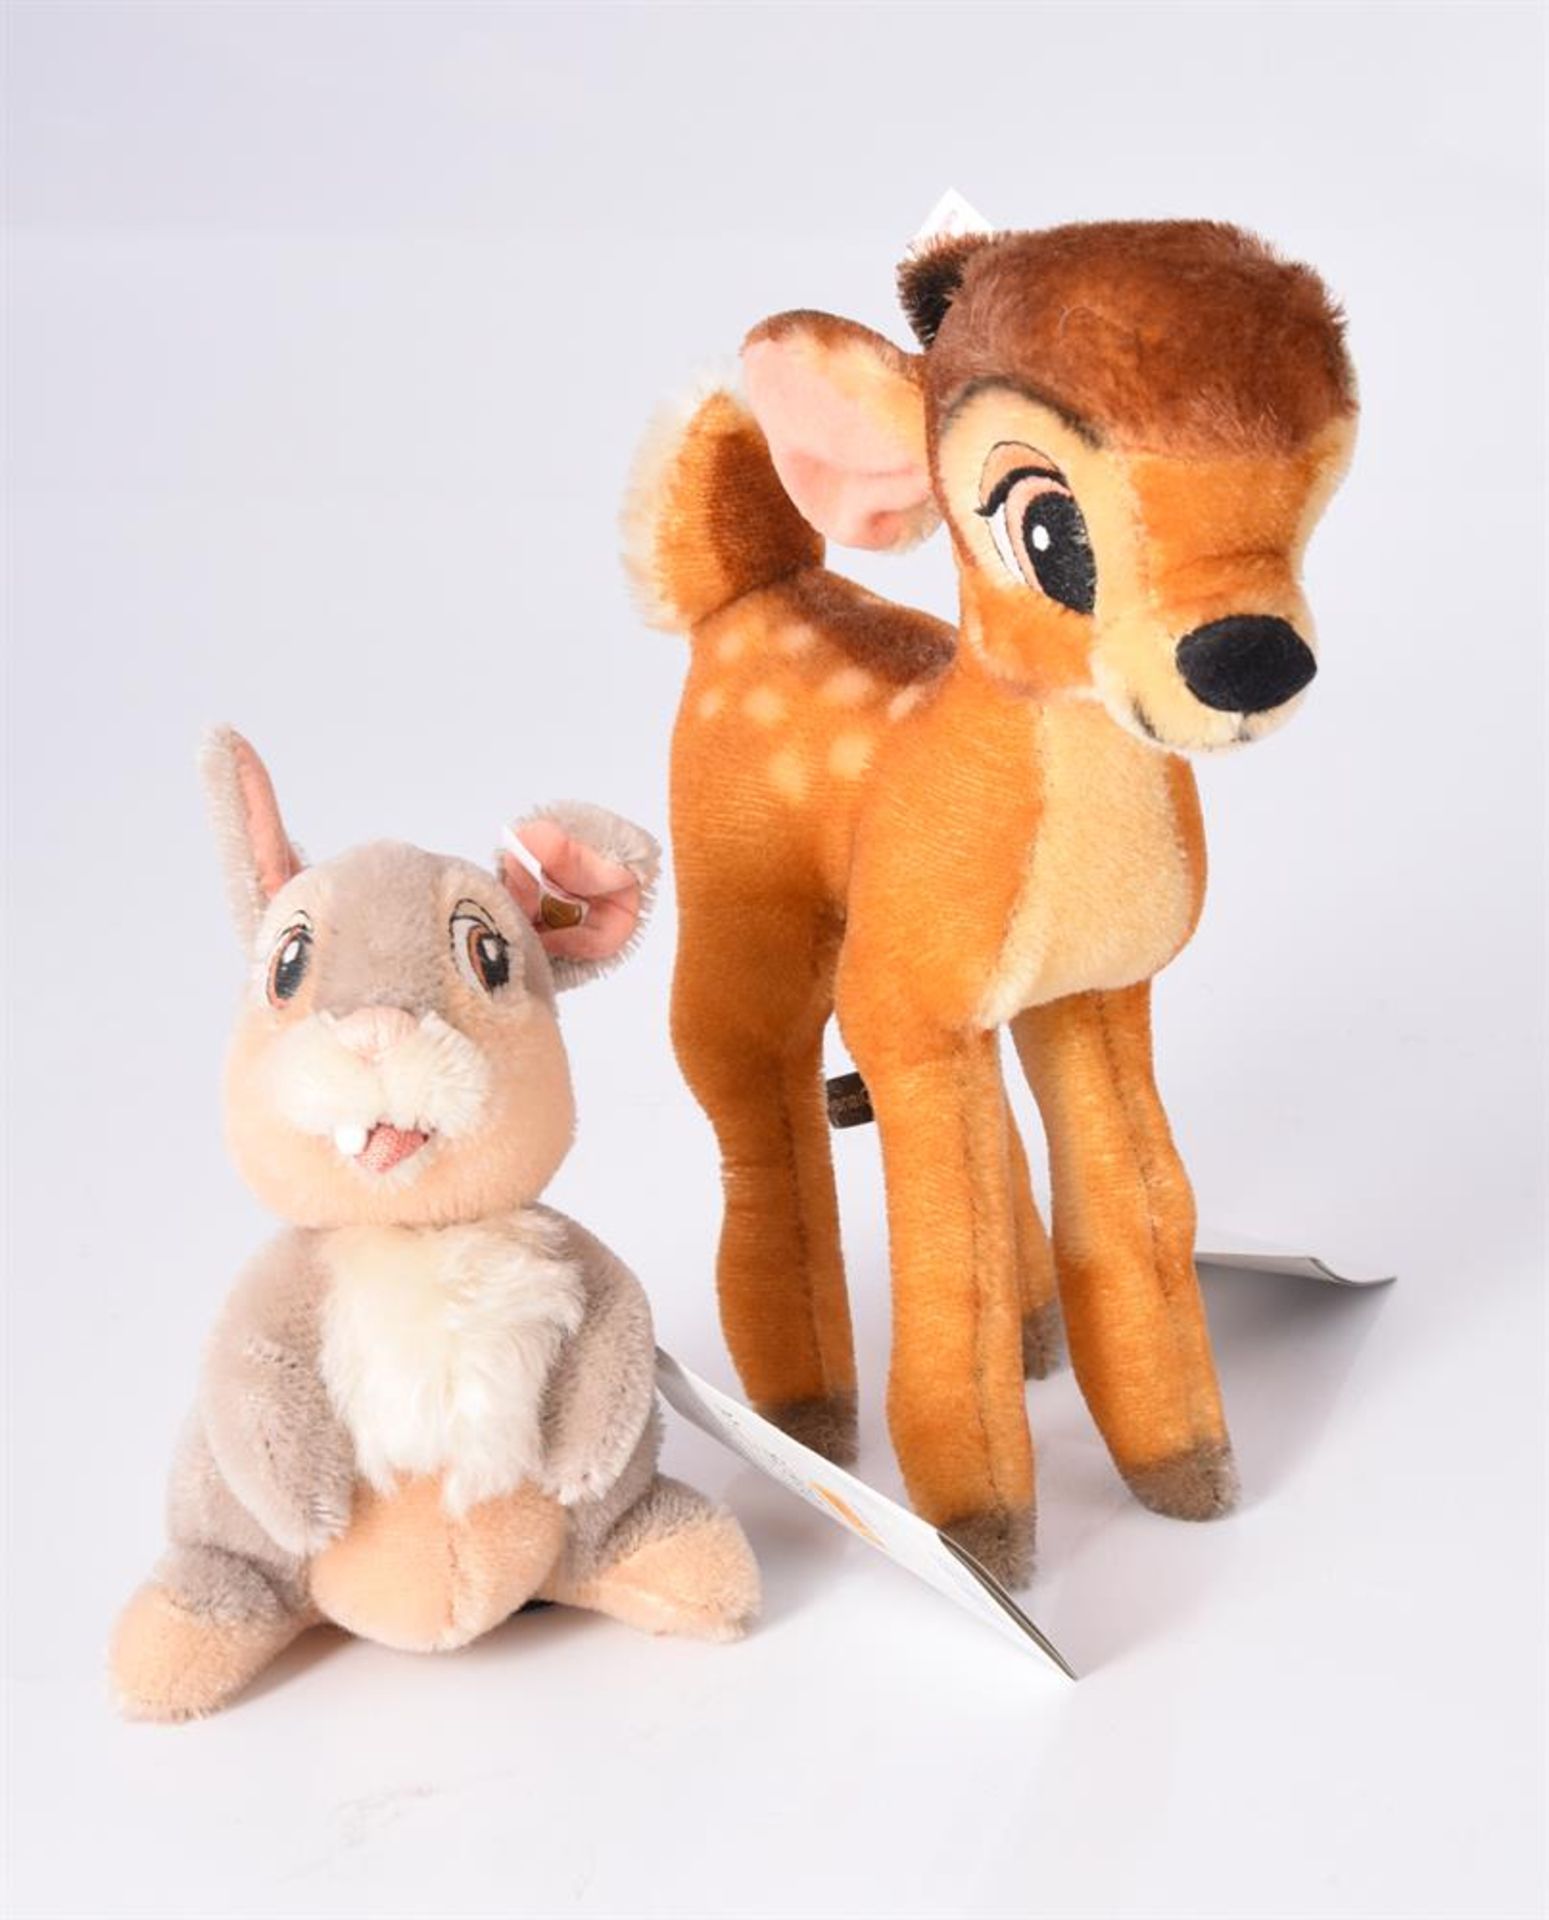 STEIFF, BAMBI AND THUMPER, 01946 and 01675, DISNEY SHOWCASE COLLECTION, CIRCA 2002